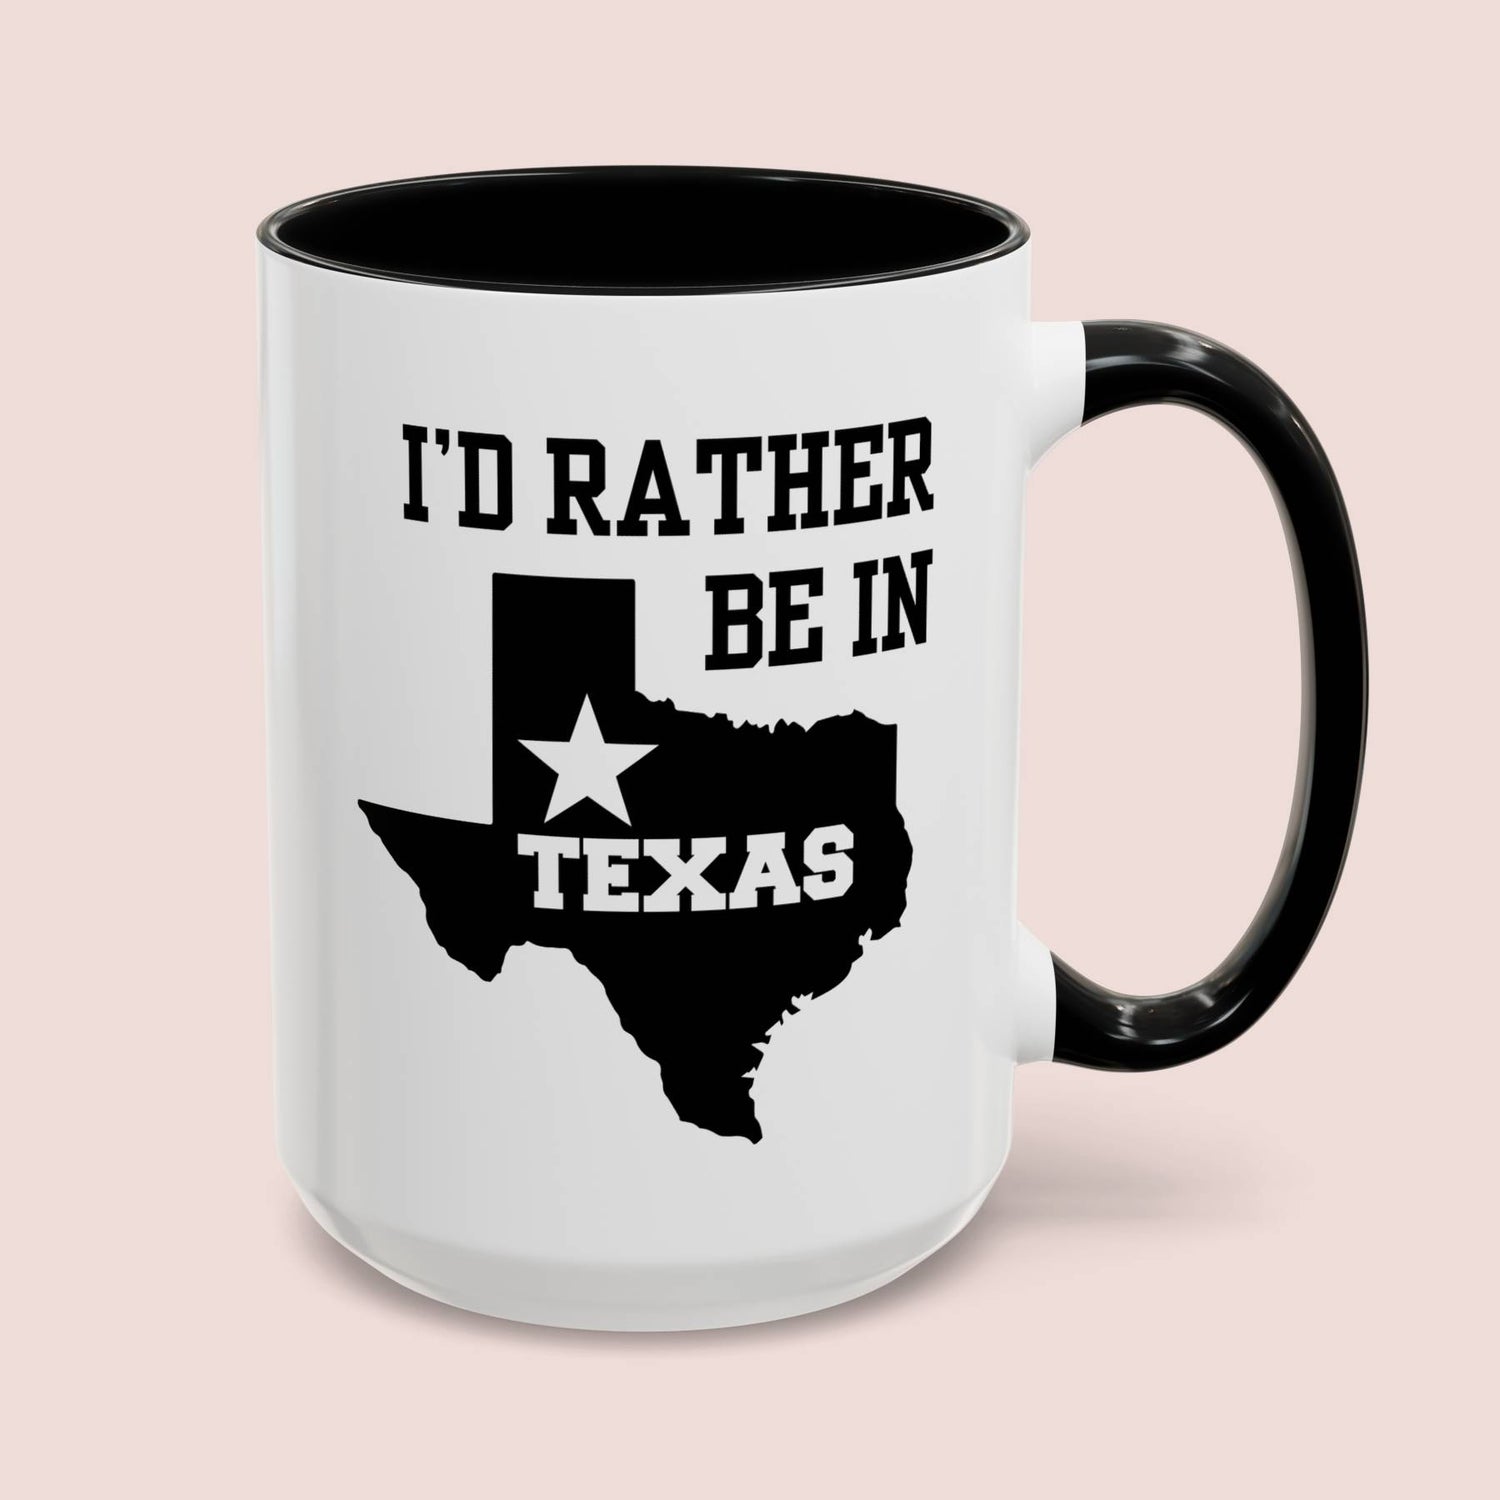 I'd Rather Be In Texas 15oz white with black accent funny large coffee mug gift for love texan novelty american USA states waveywares wavey wares wavywares wavy wares cover